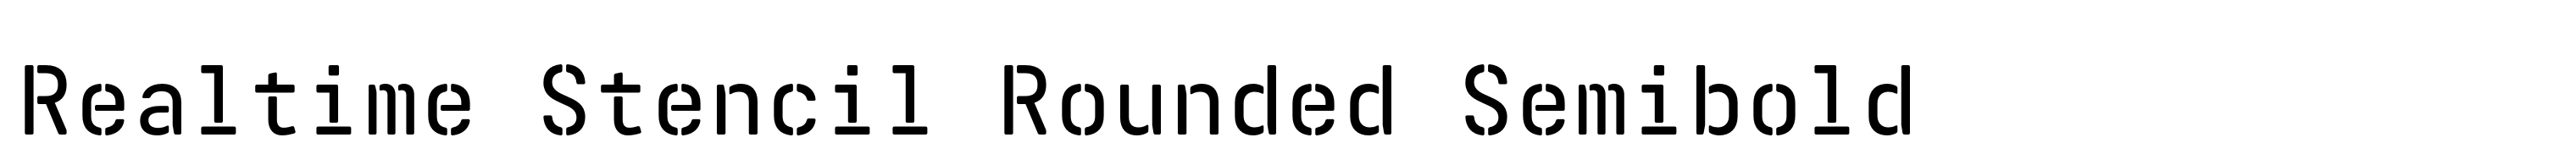 Realtime Stencil Rounded Semibold